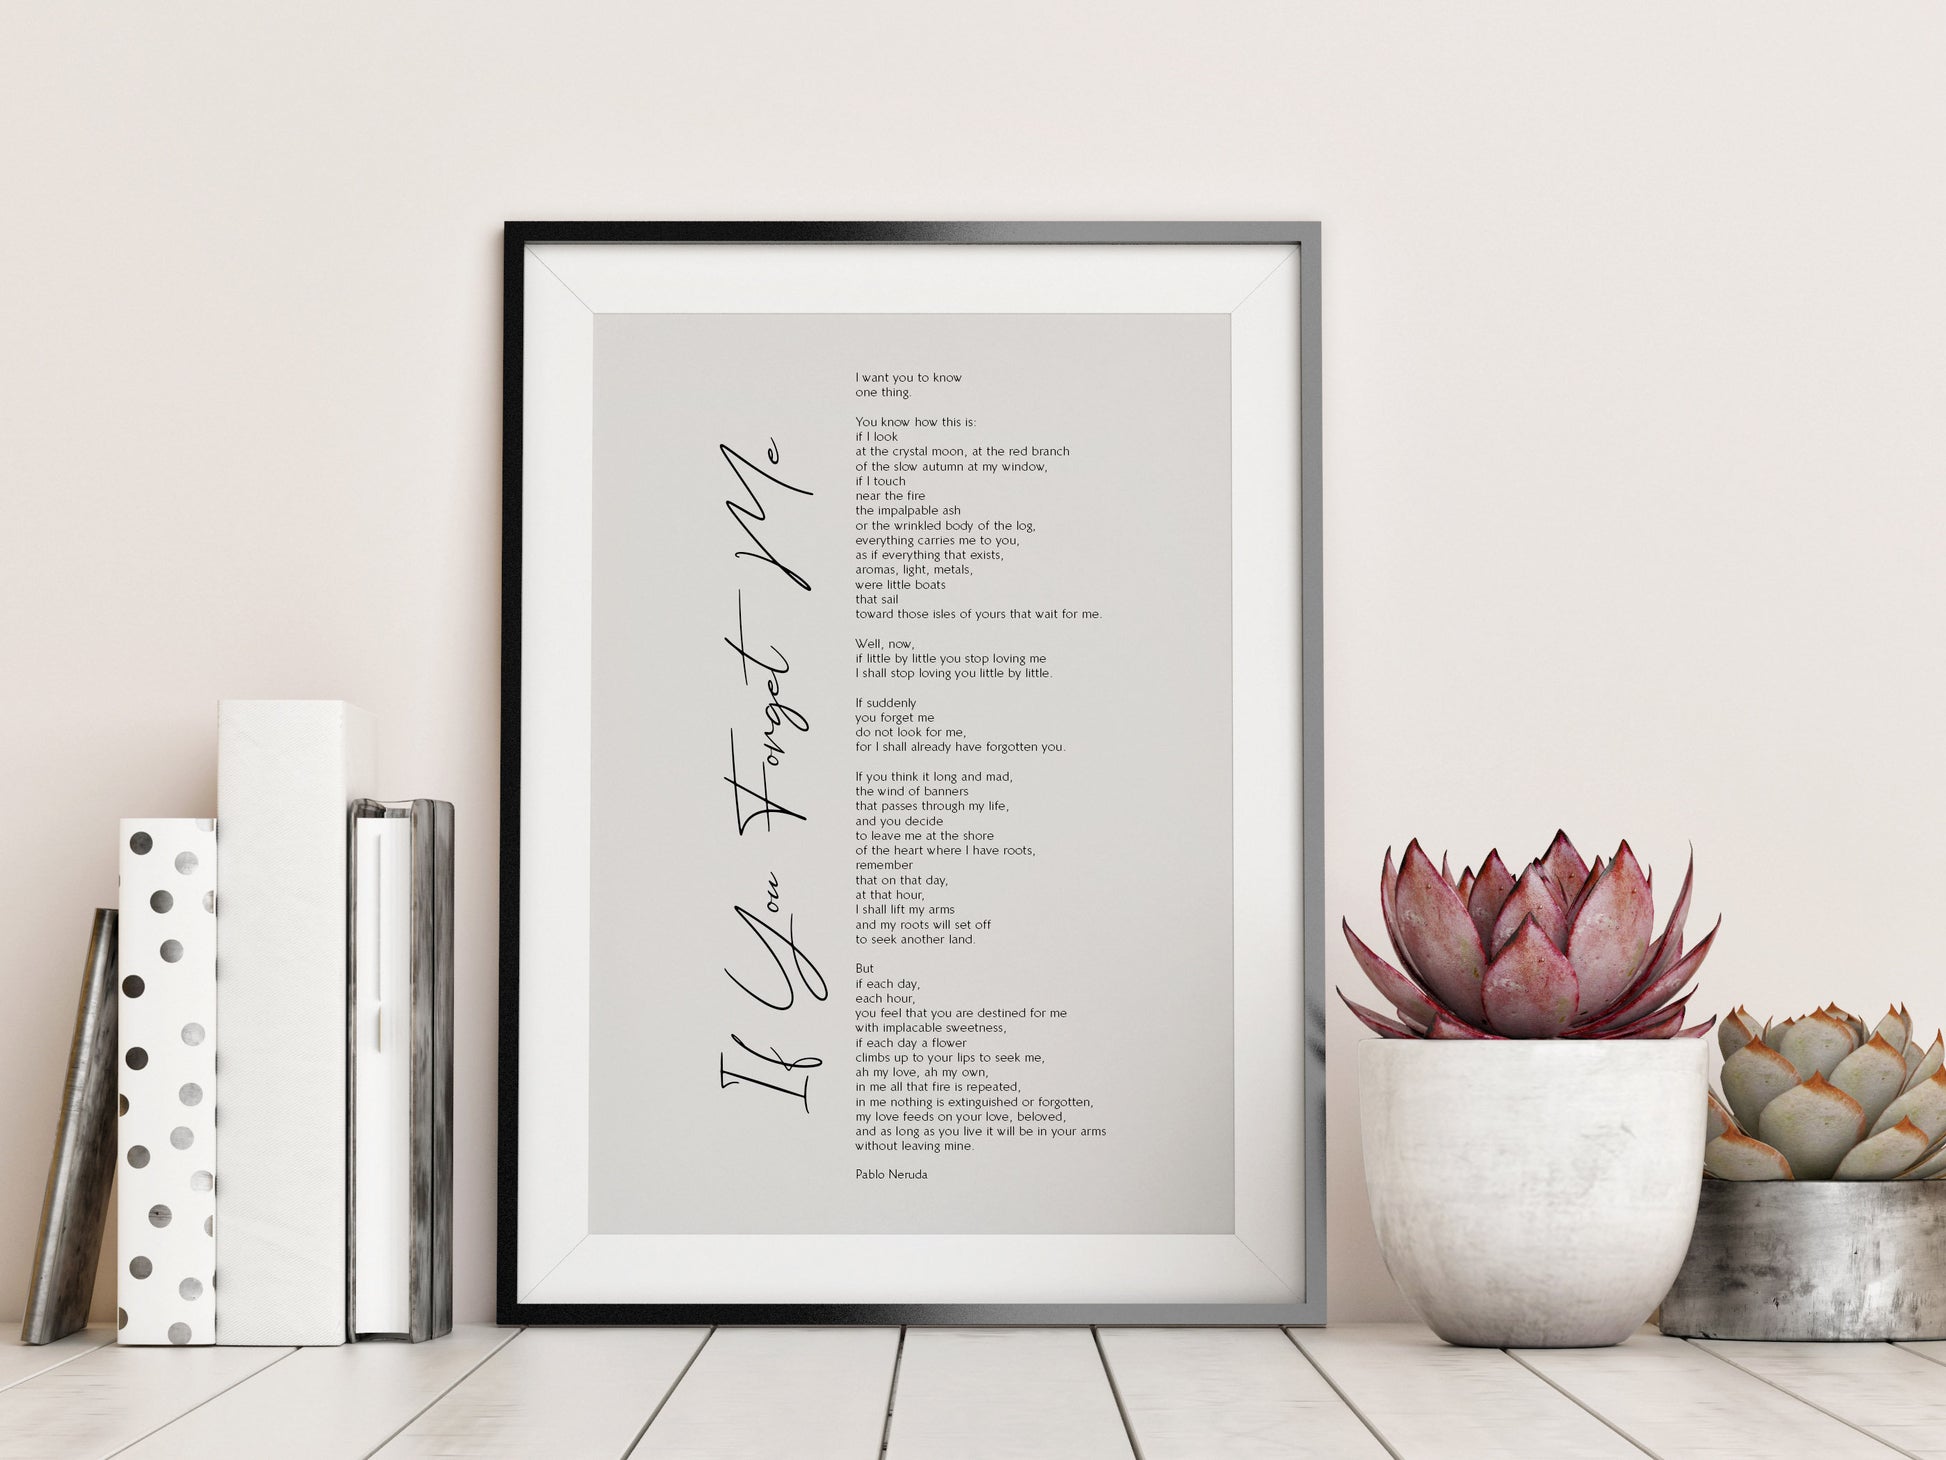 If you forget me Print by Pablo Neruda Print Framed - If you forget me - Funeral reading - Bereavement gift - Pablo Neruda Poem - Memorial